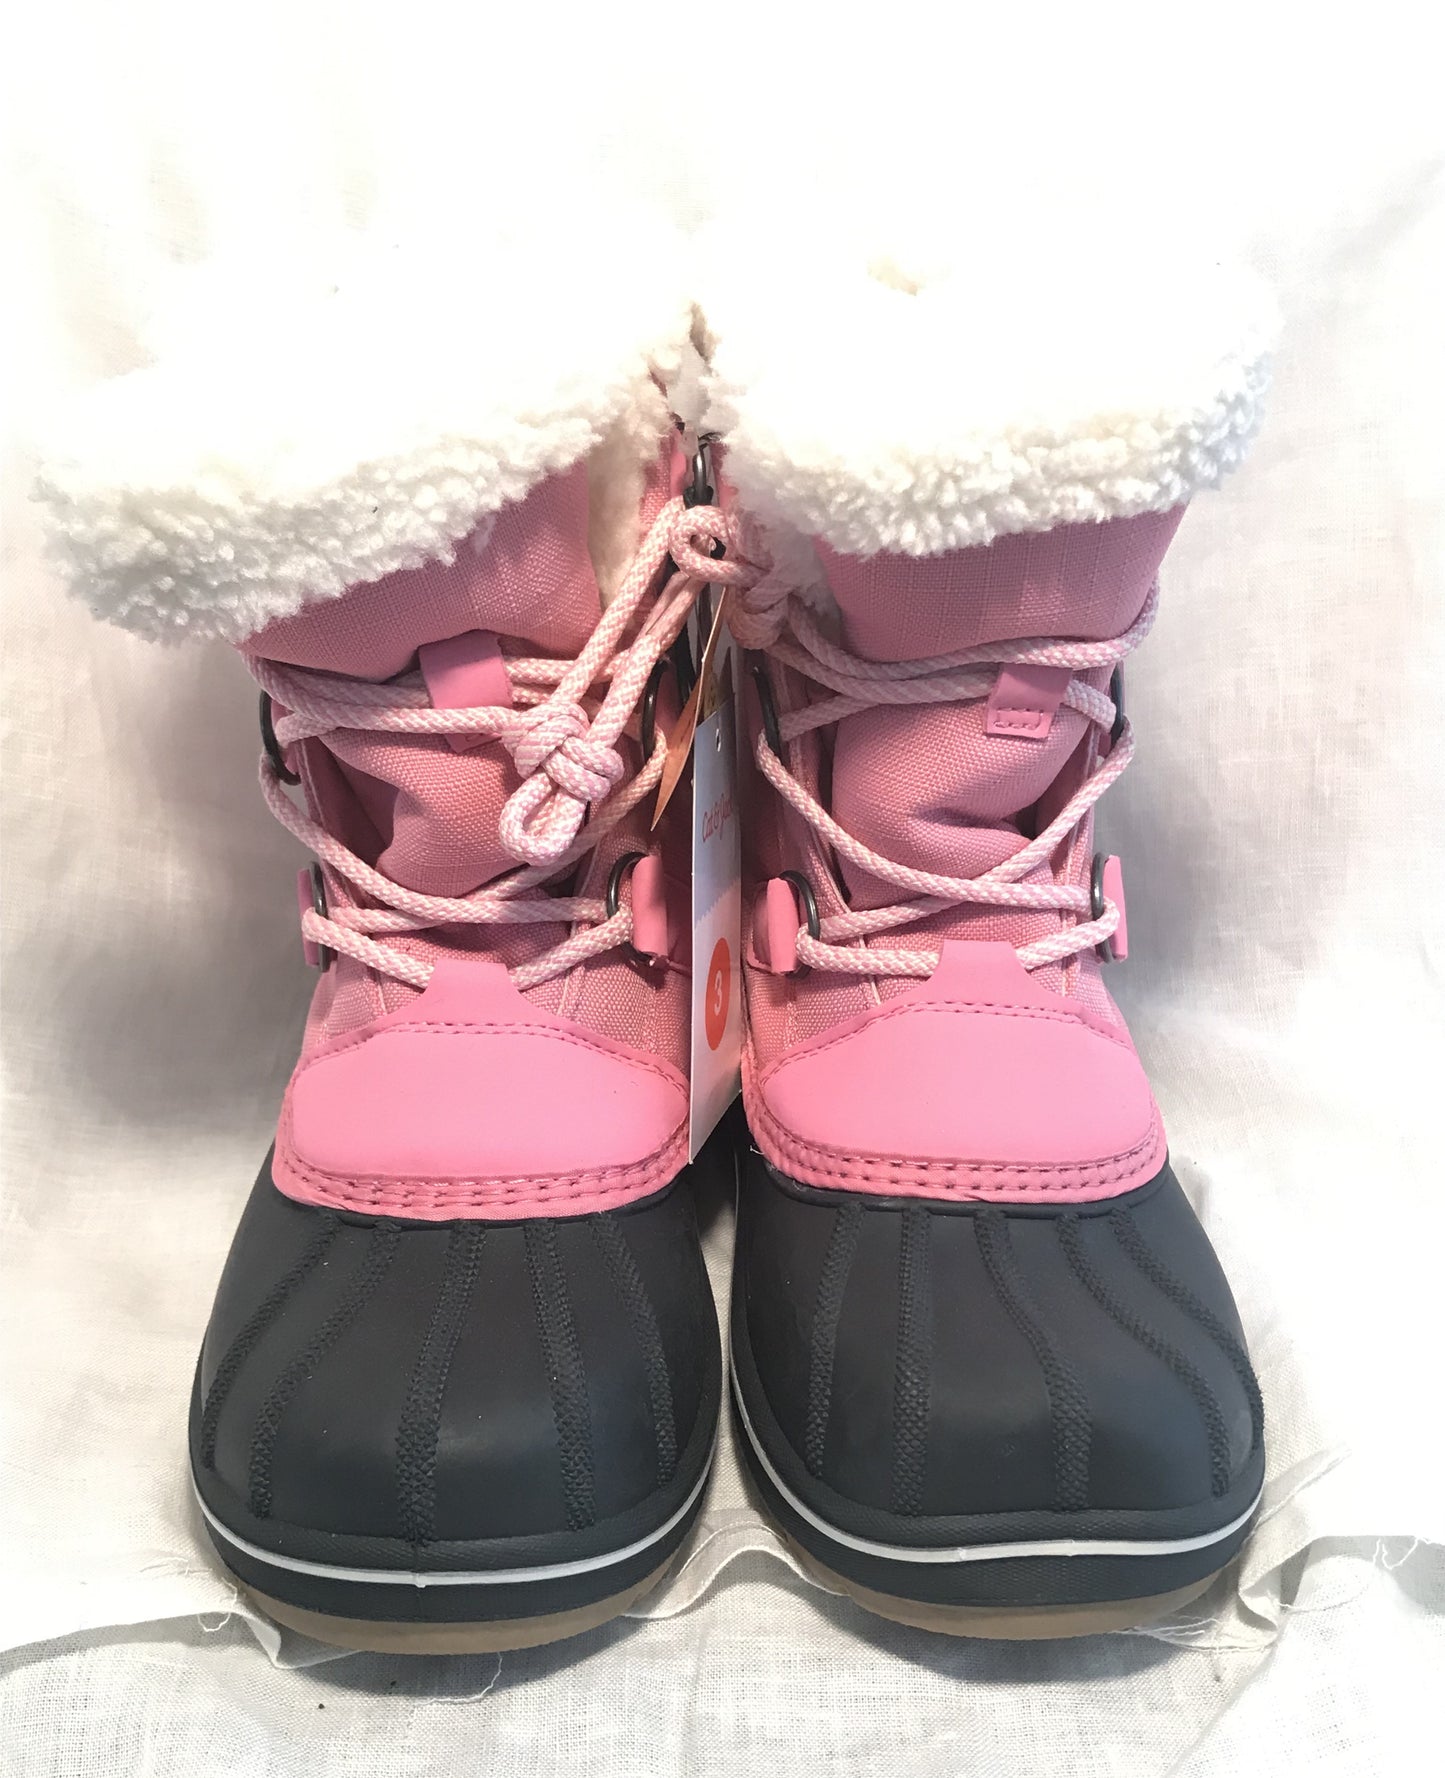 Pink & Black Boots- Sizes 3